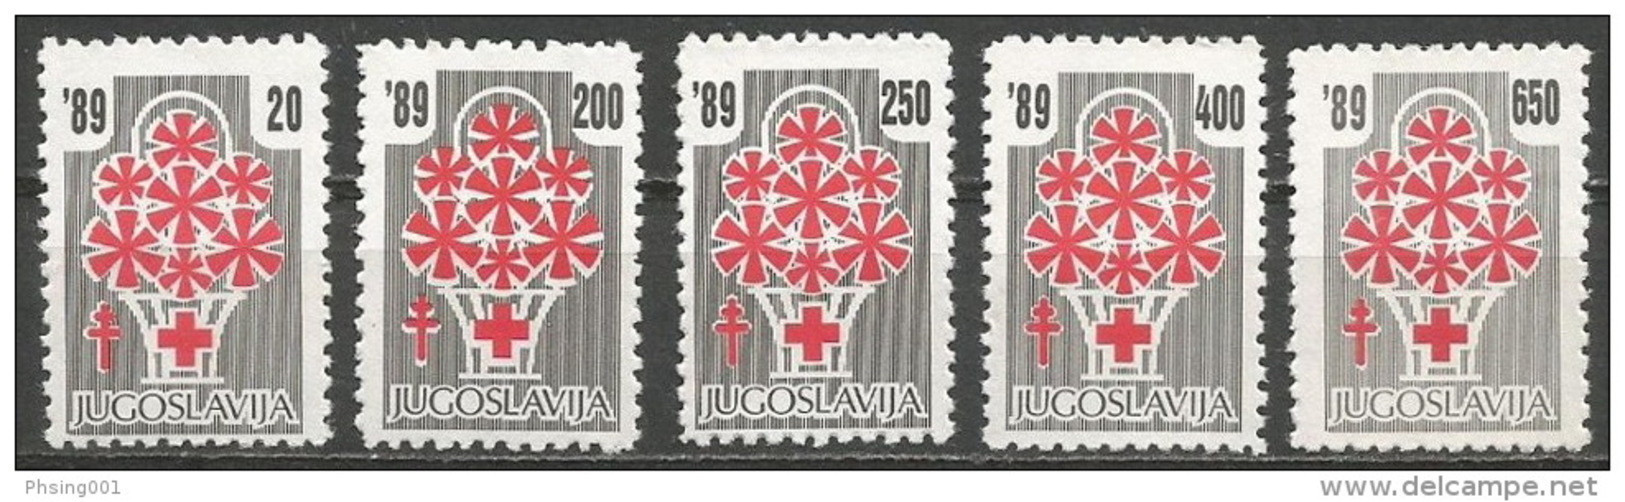 Yugoslavia 1989 Red Cross Tuberculosis TBC Postage Due Tax Charity Surcharge, Set MNH - Segnatasse